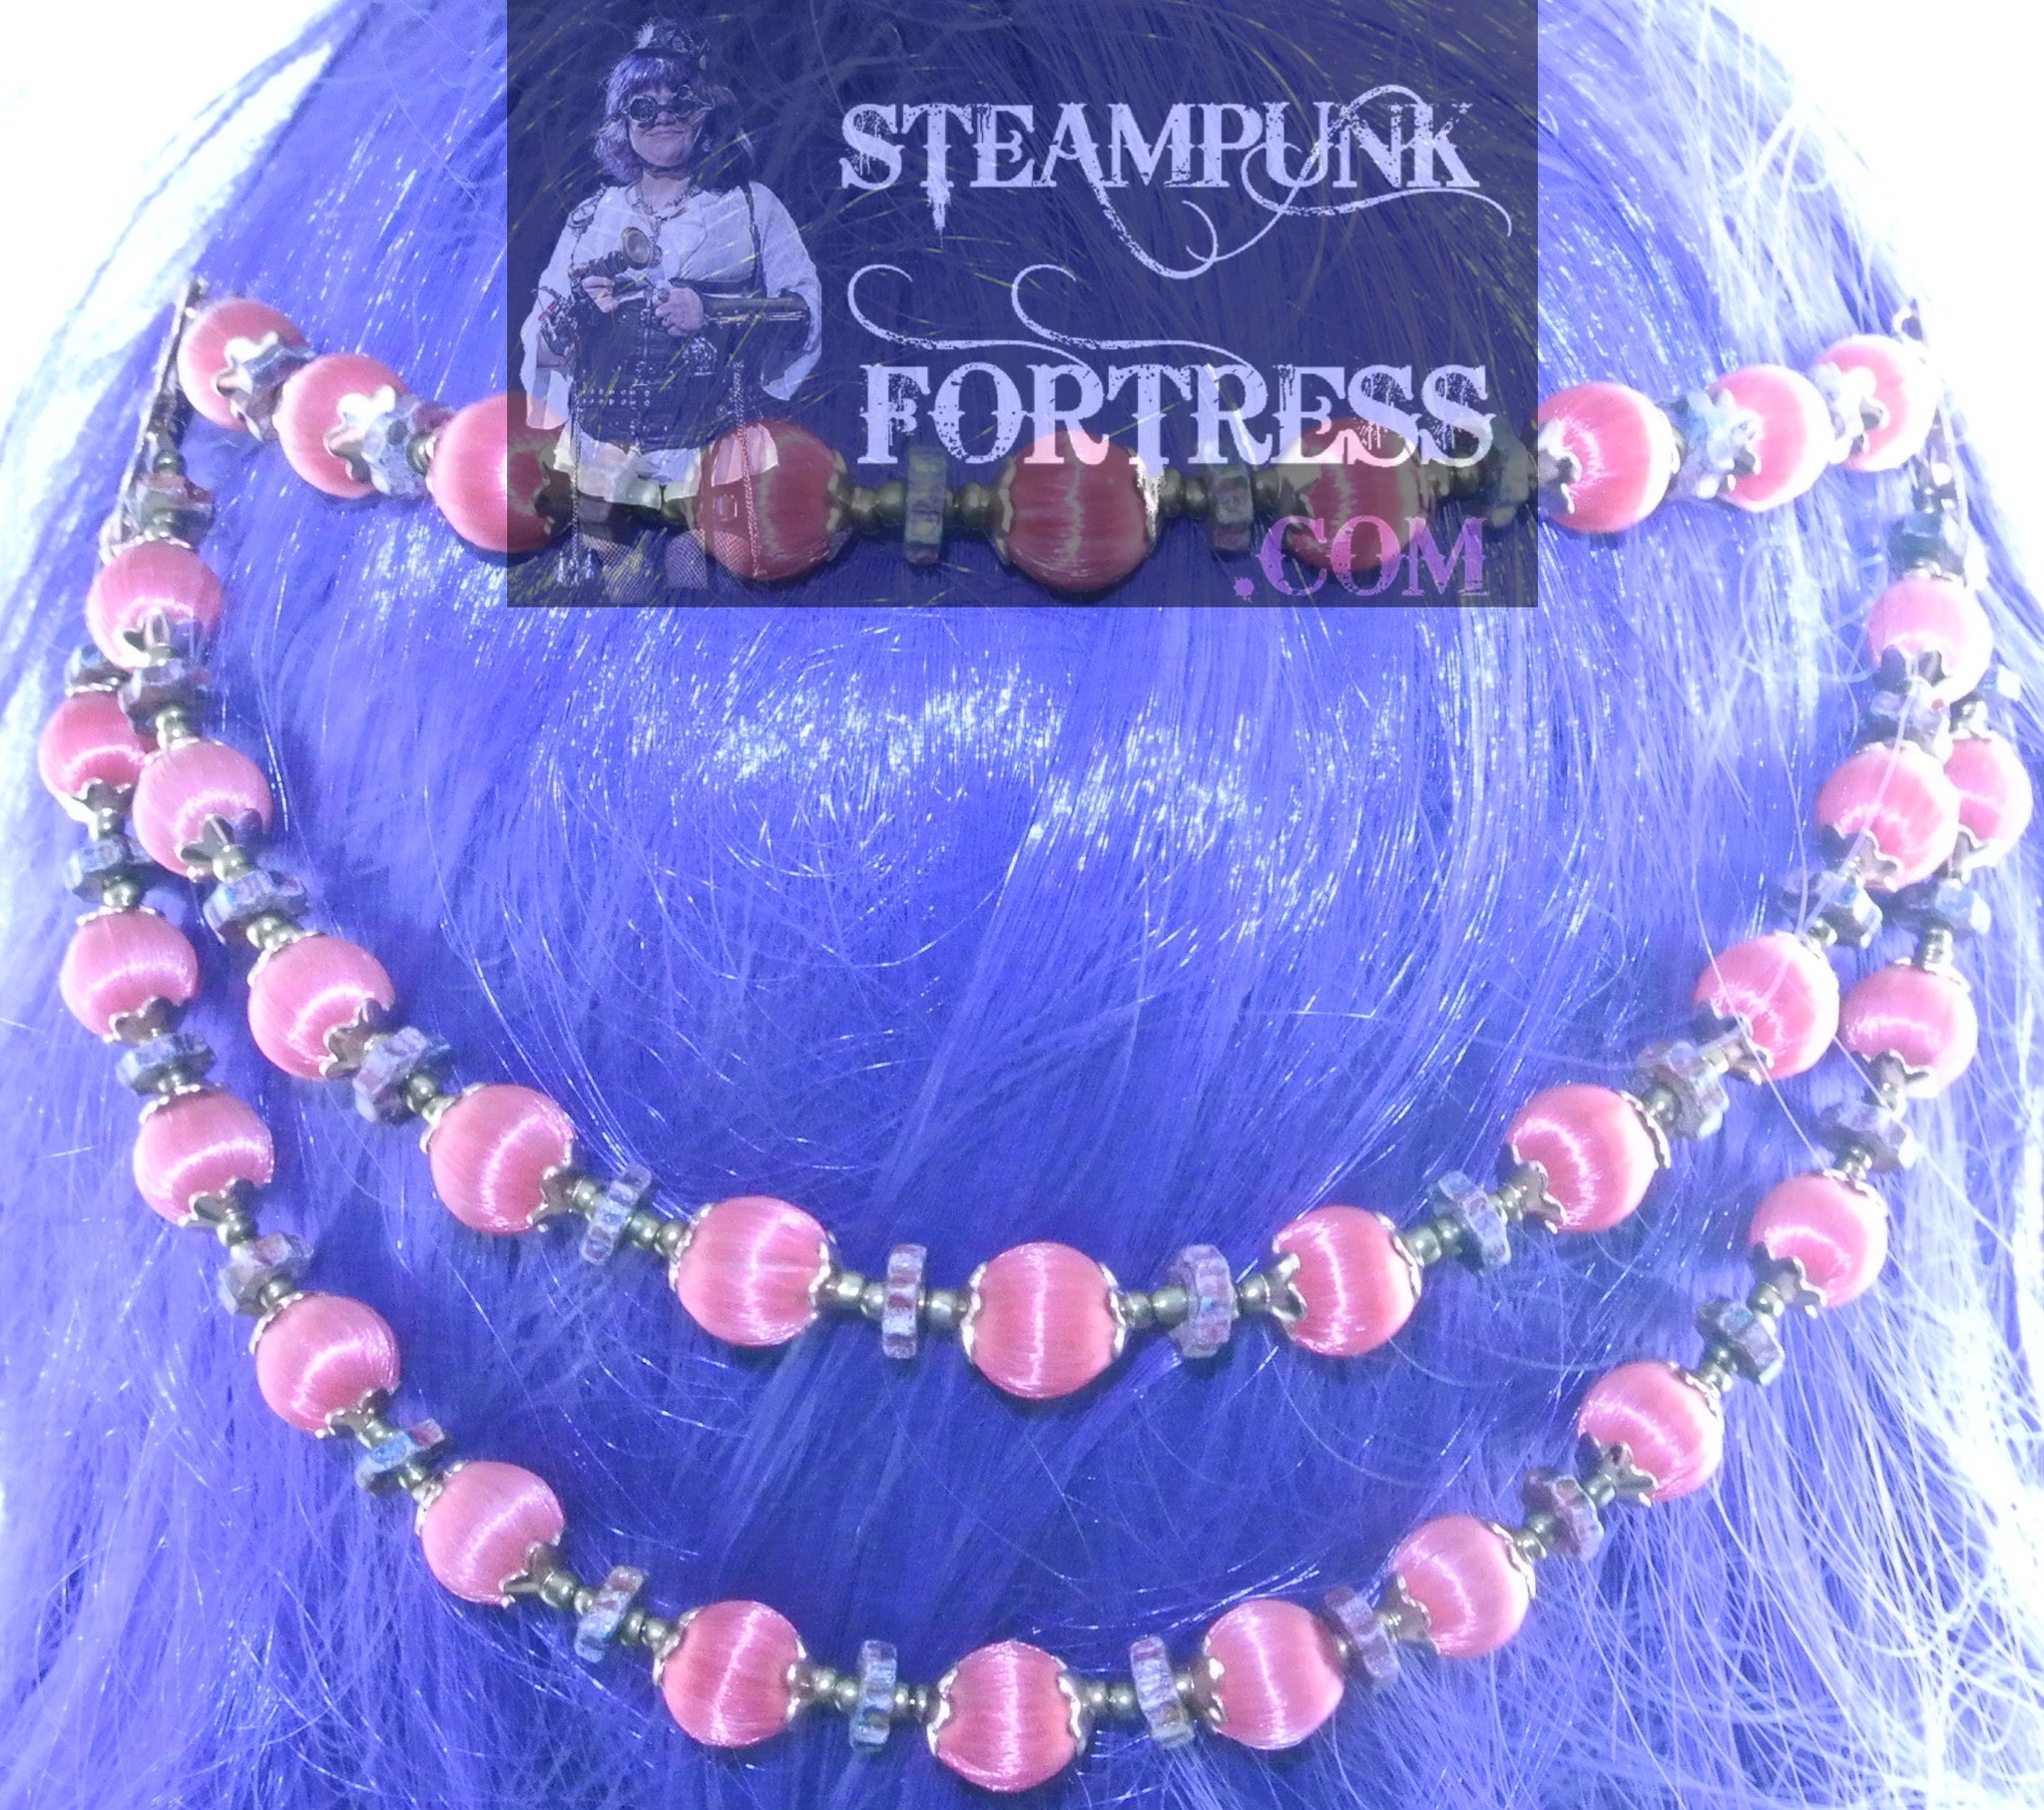 HAIR TIARA COPPER BRIGHT RED LIGHT NYLON ROUND BEADS COPPER FLOWER BEAD CAPS RED CERAMIC GEARS BRONZE SEED BEADS HAIR COMBS SET AVAILABLE STARR WILDE STEAMPUNK FORTRESS GOTHIC WEDDING VICTORIAN